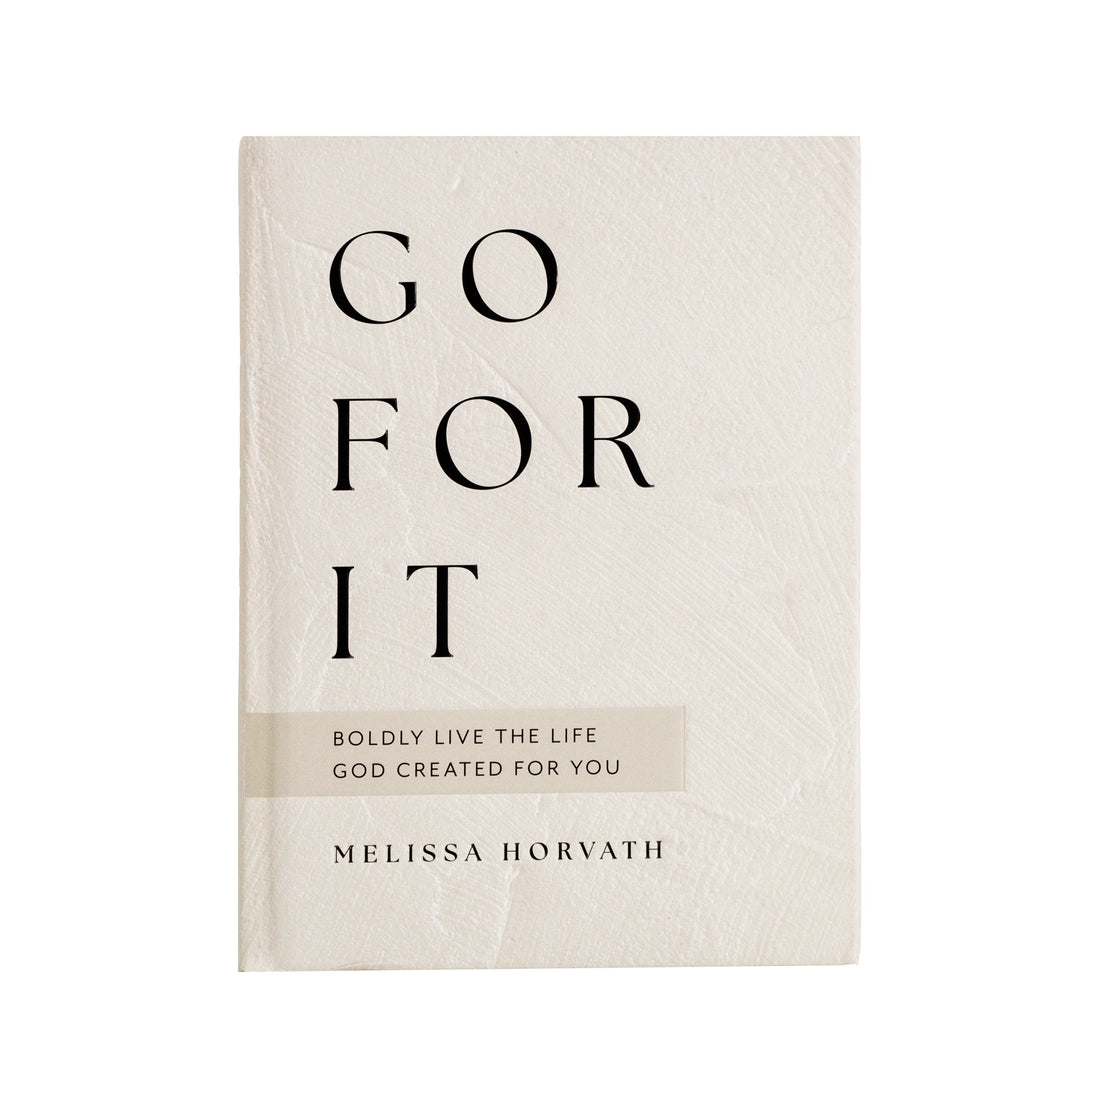 Go For It: 90 Devotions to Boldly Living the Life God Created